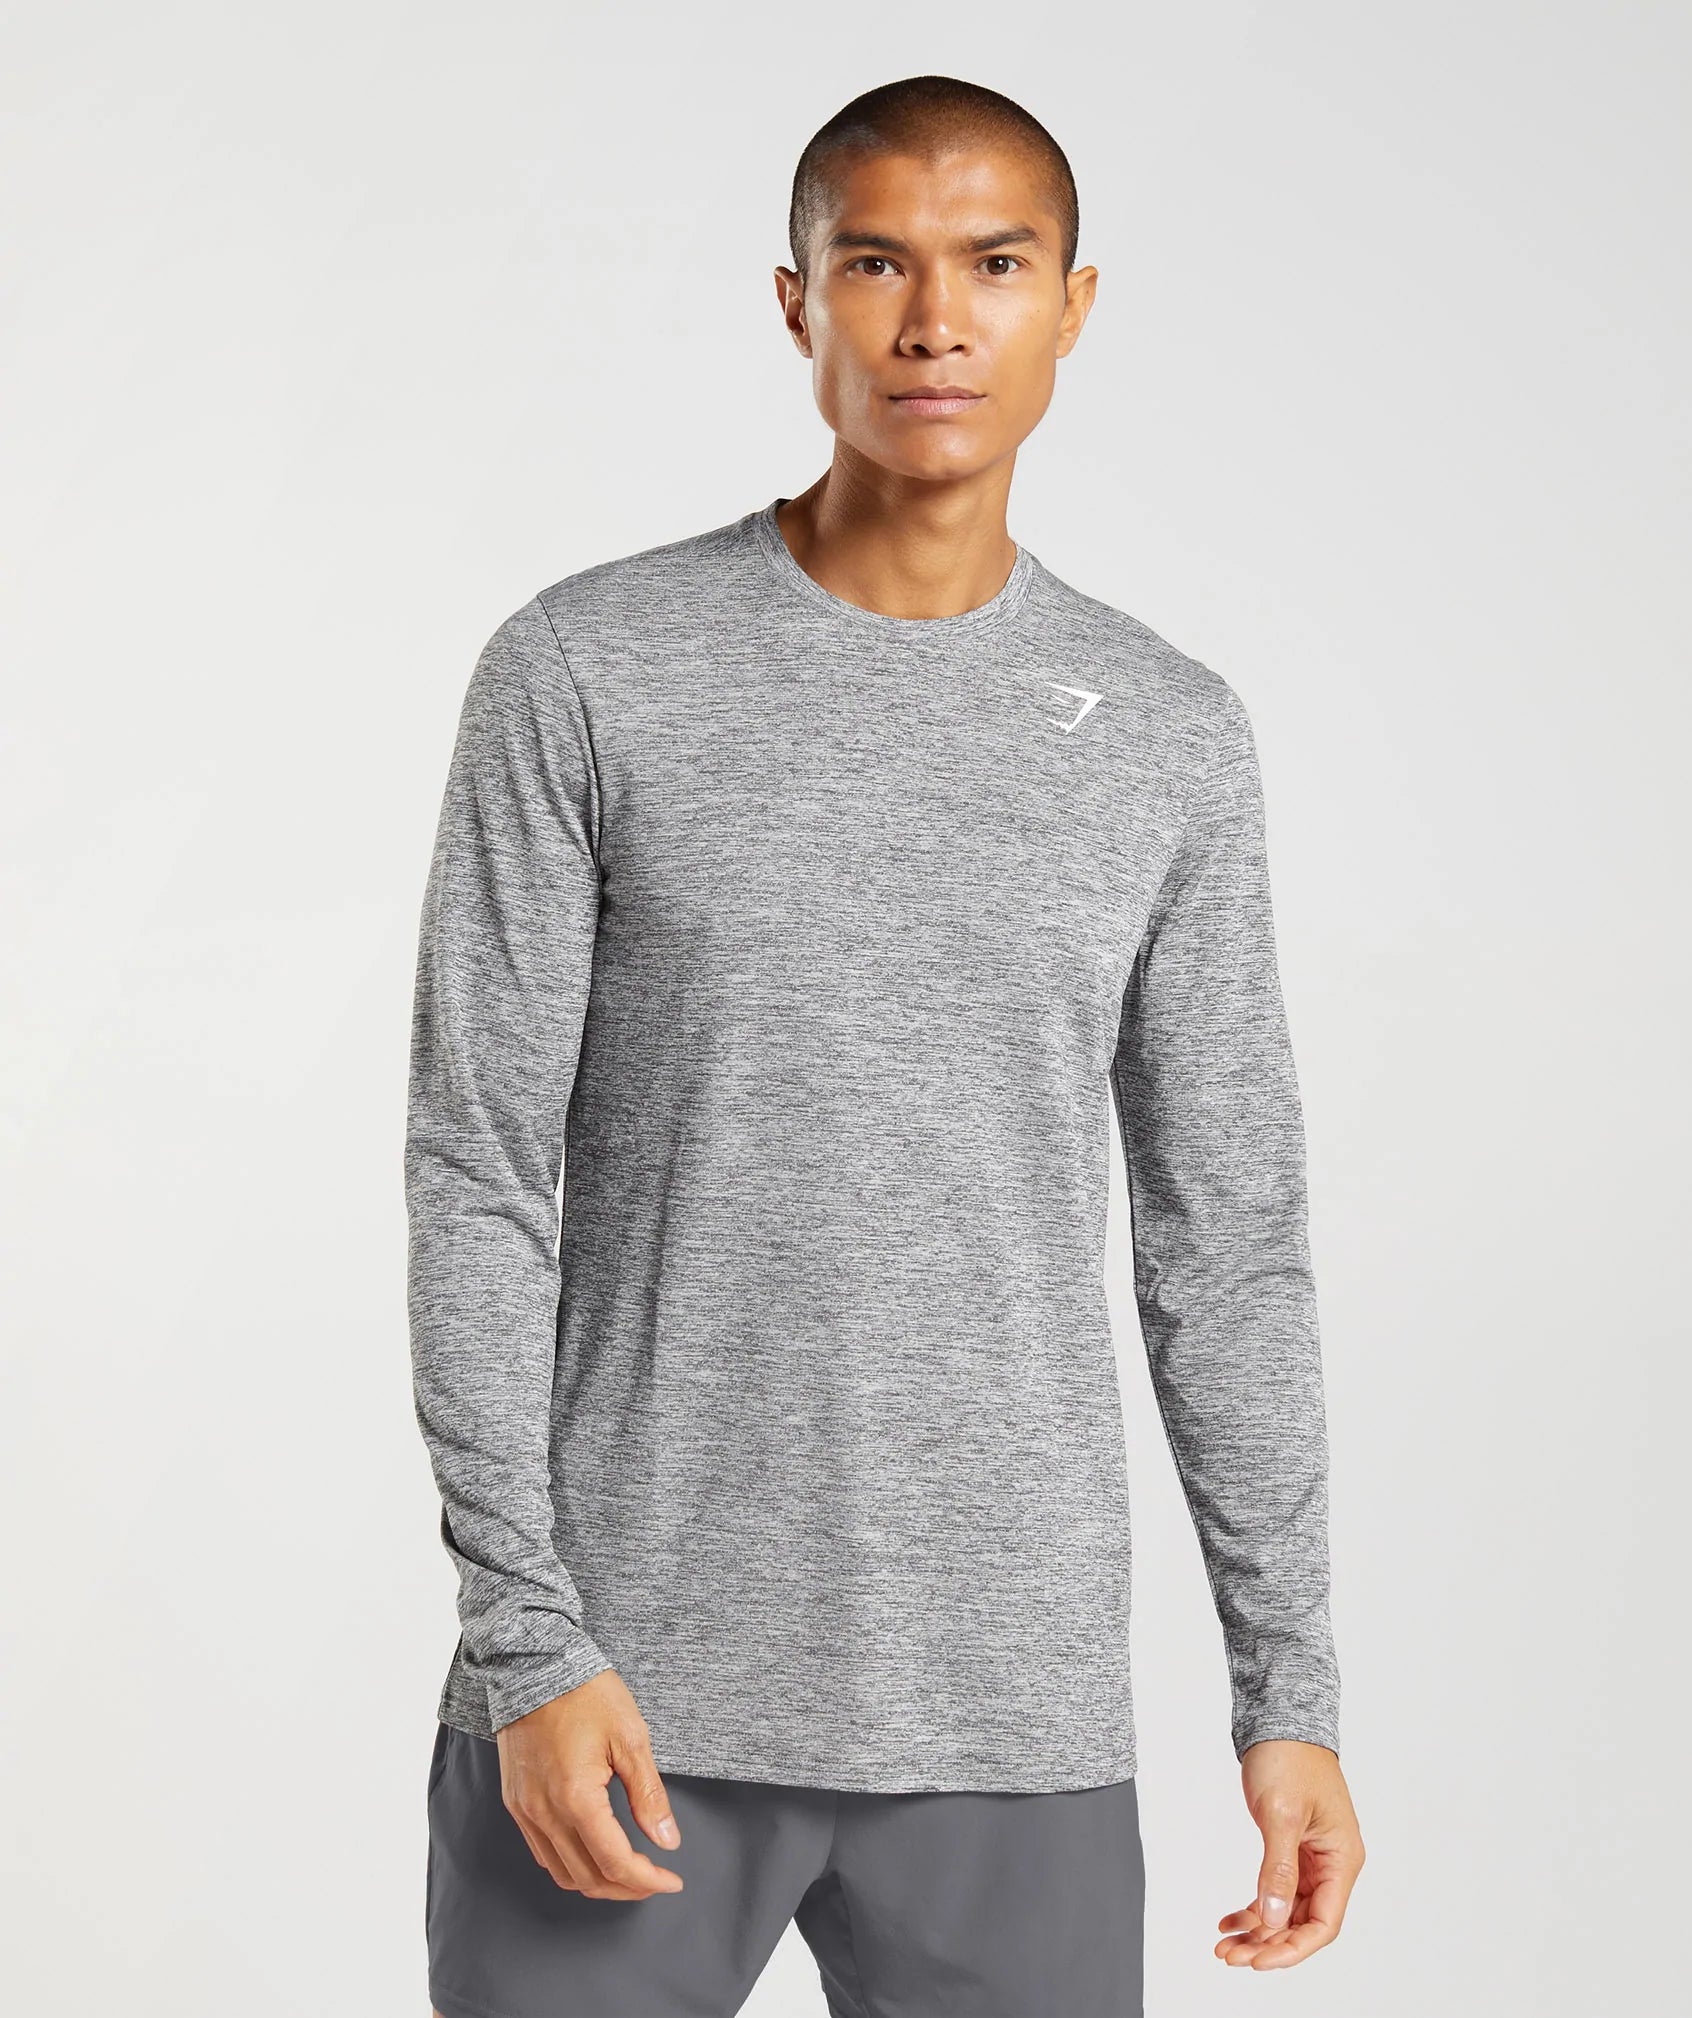 Arrival Long Sleeve T-Shirt in Silhouette Grey/Light Grey Marl - view 1